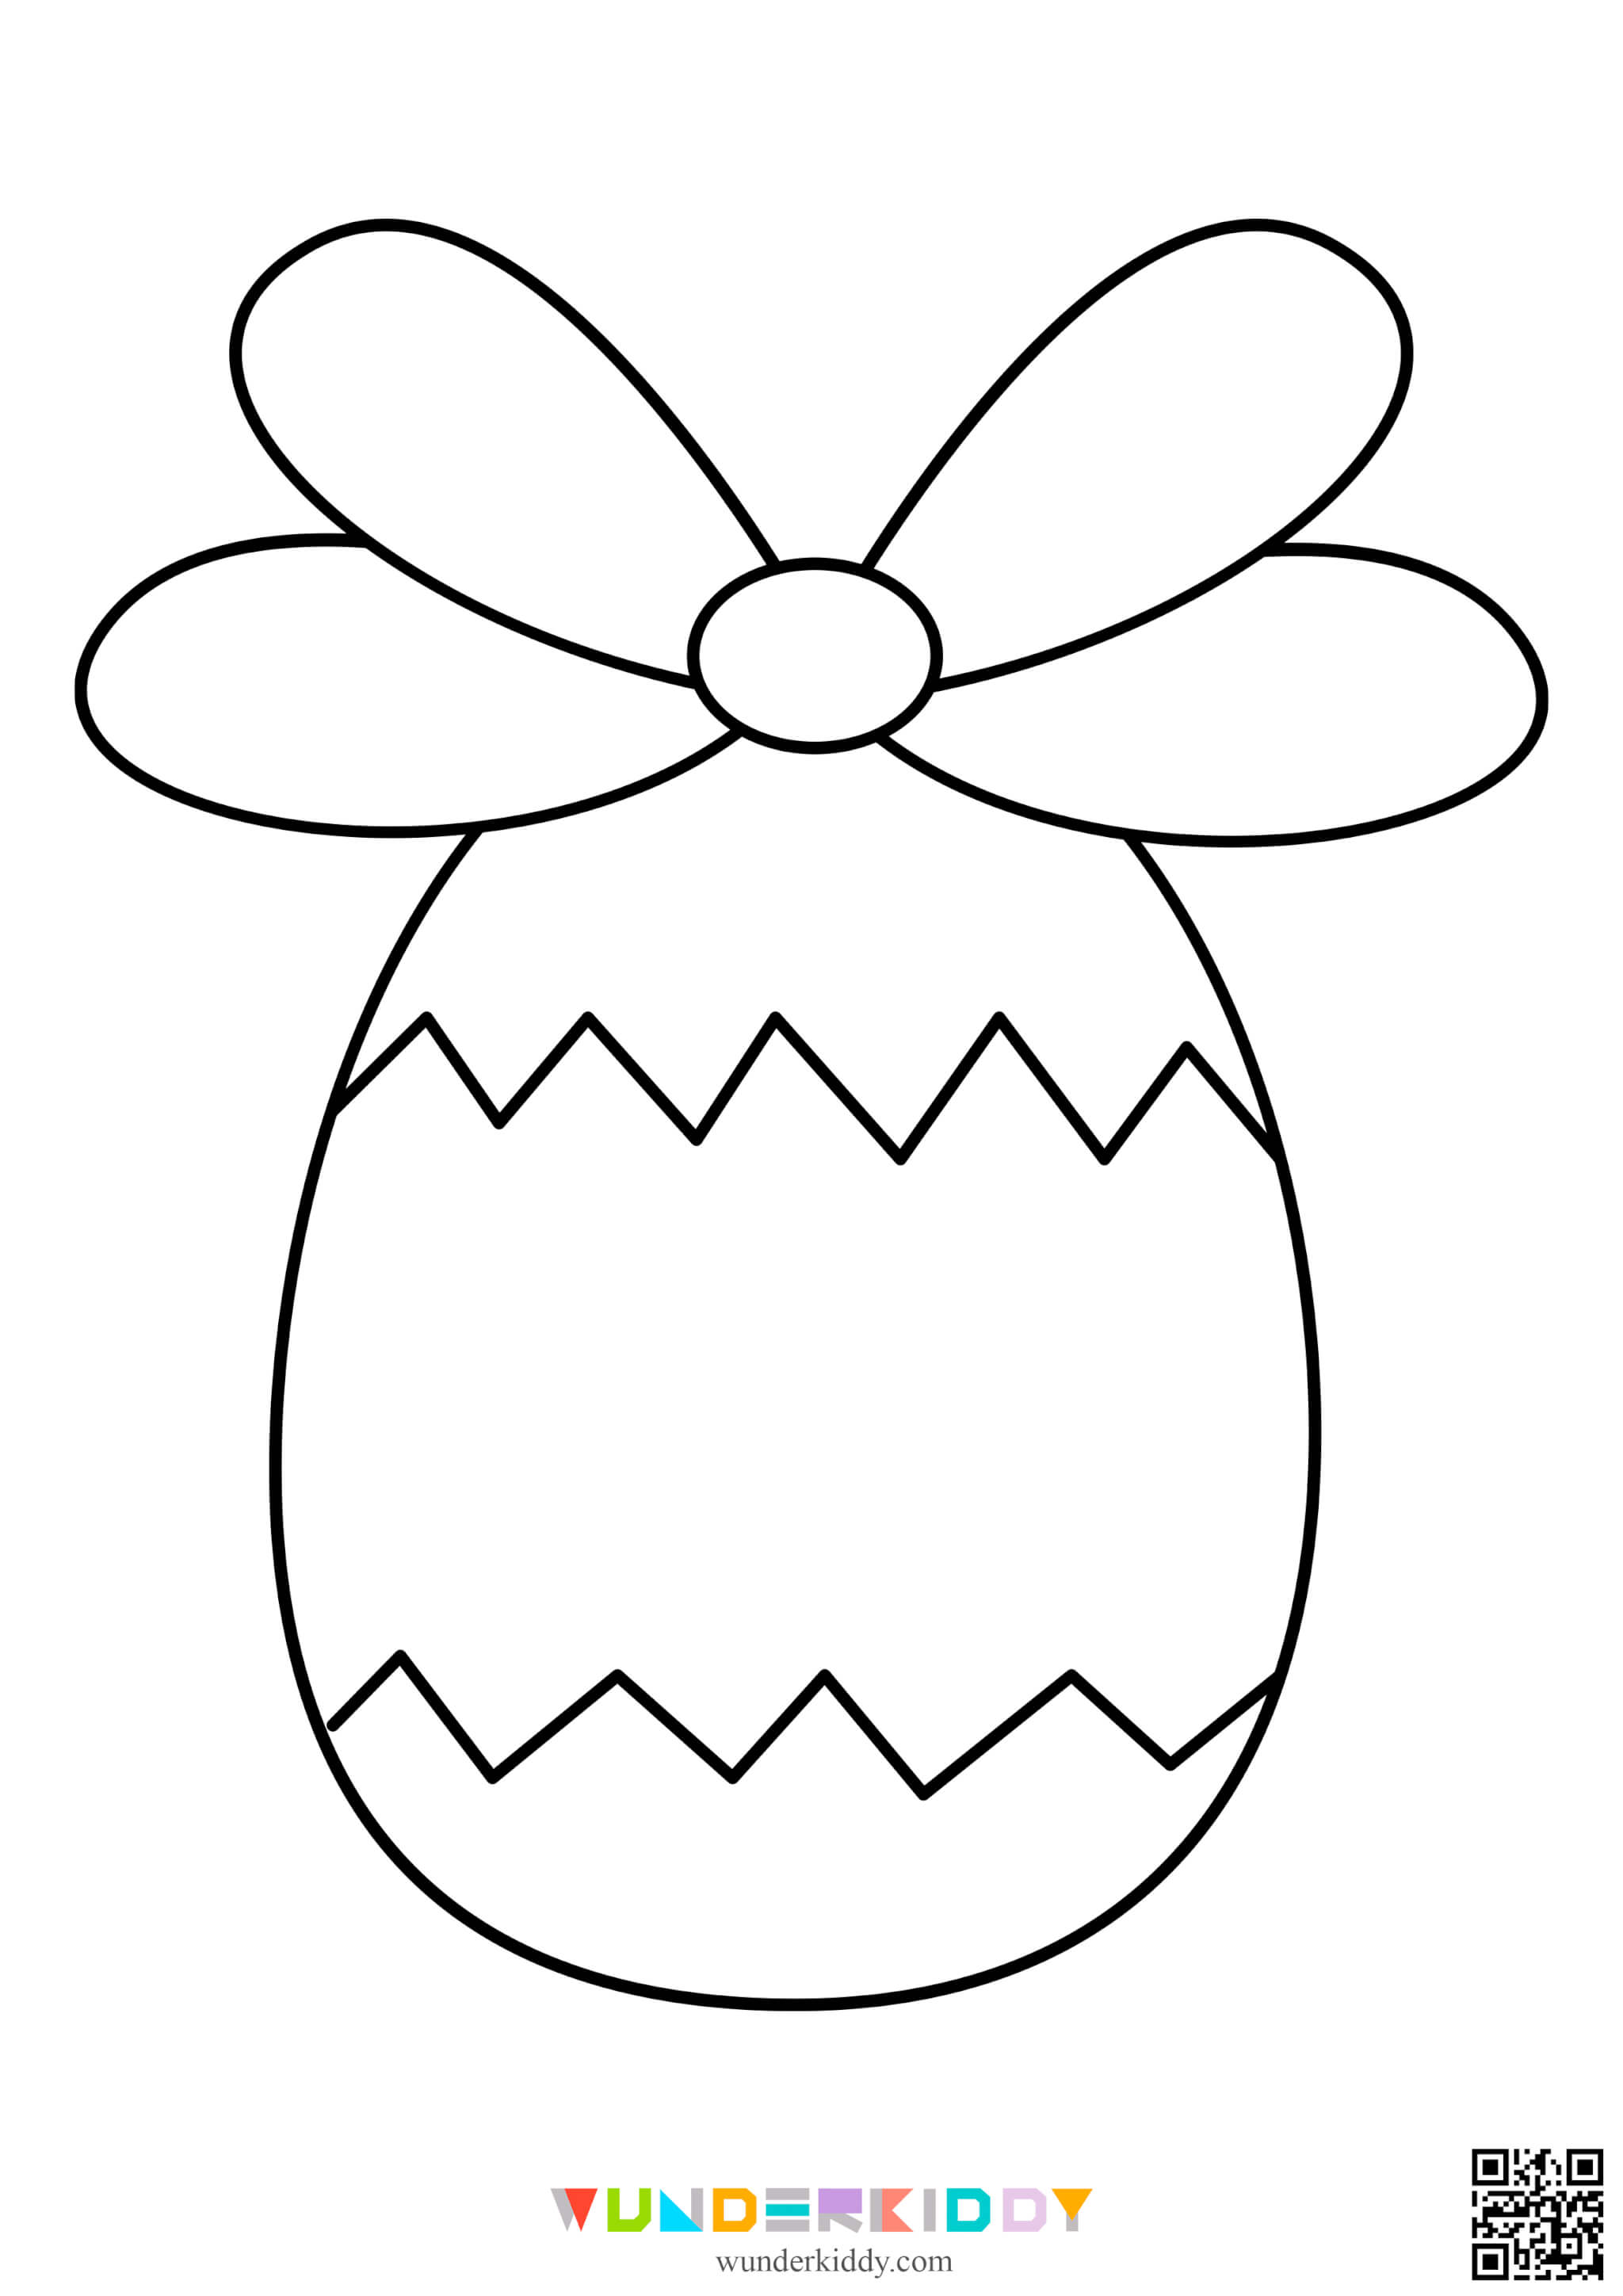 Easter Eggs Coloring Pages - Image 7